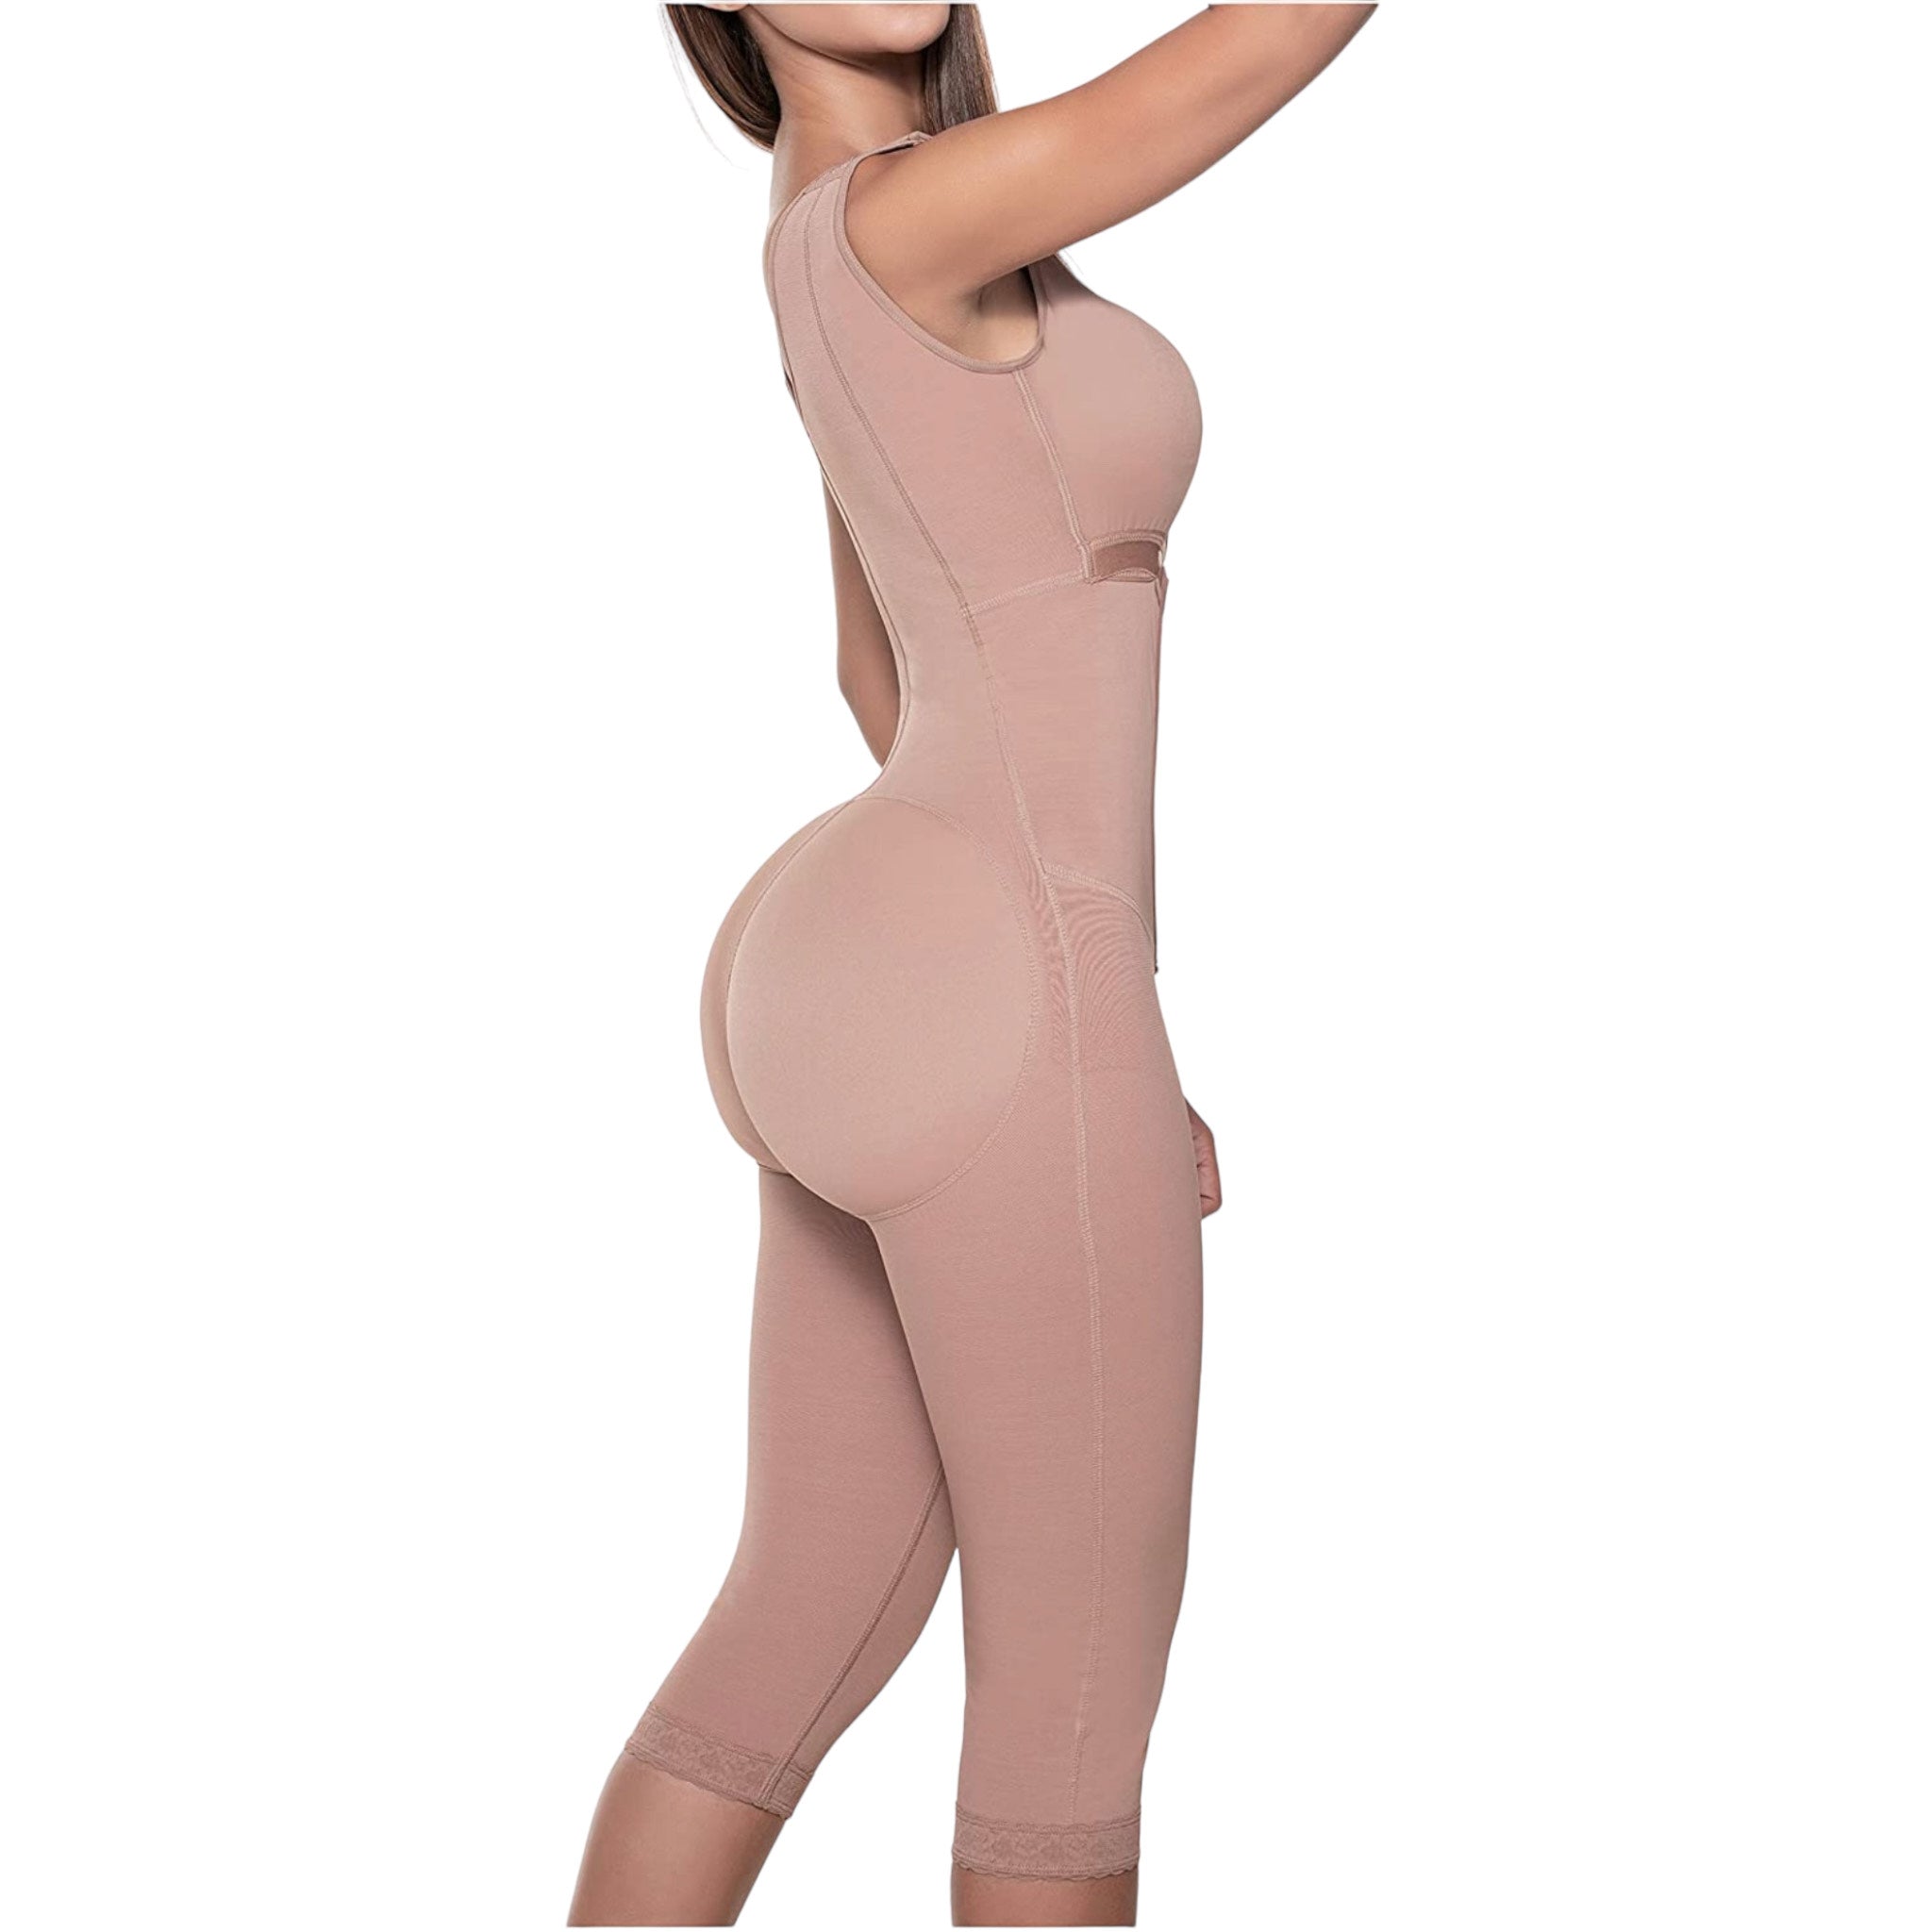 Body Shaper/ Lipo Express Curves Bodyshaper Faja. Size 3XL Choose From  Different Styles and Colors From the Pictures 